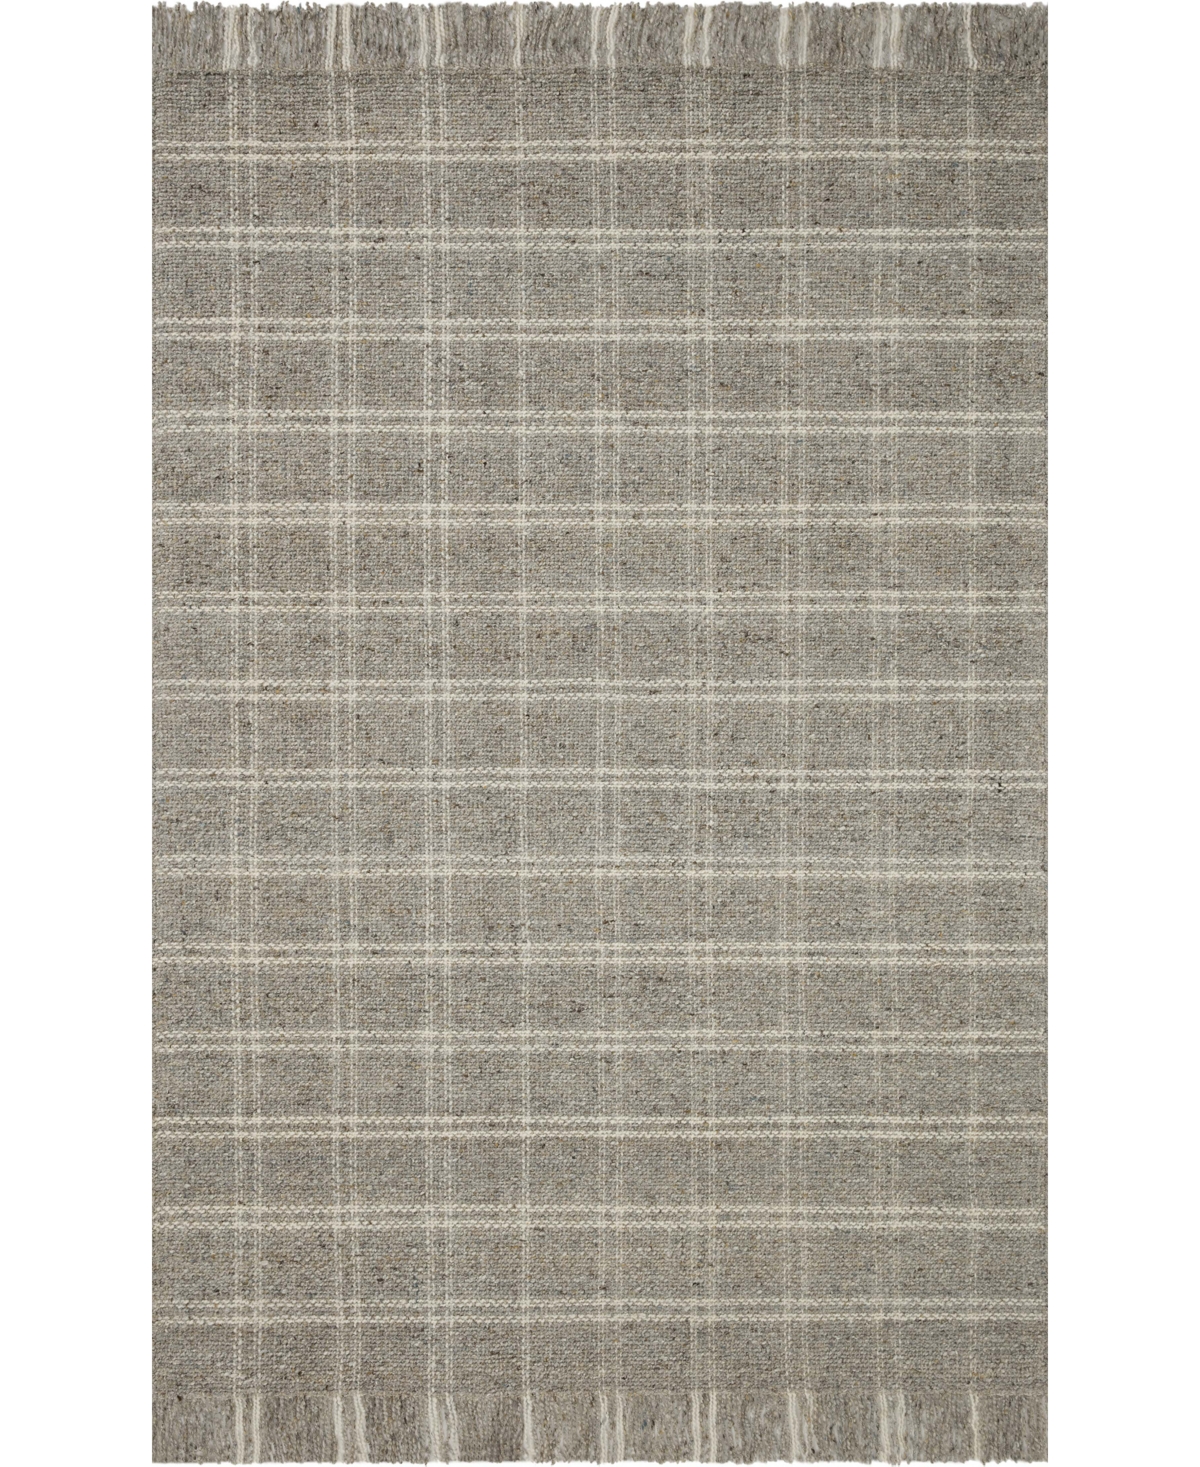 Magnolia Home By Joanna Gaines X Loloi Caleb Cal-04 5' X 7'6" Area Rug In Taupe